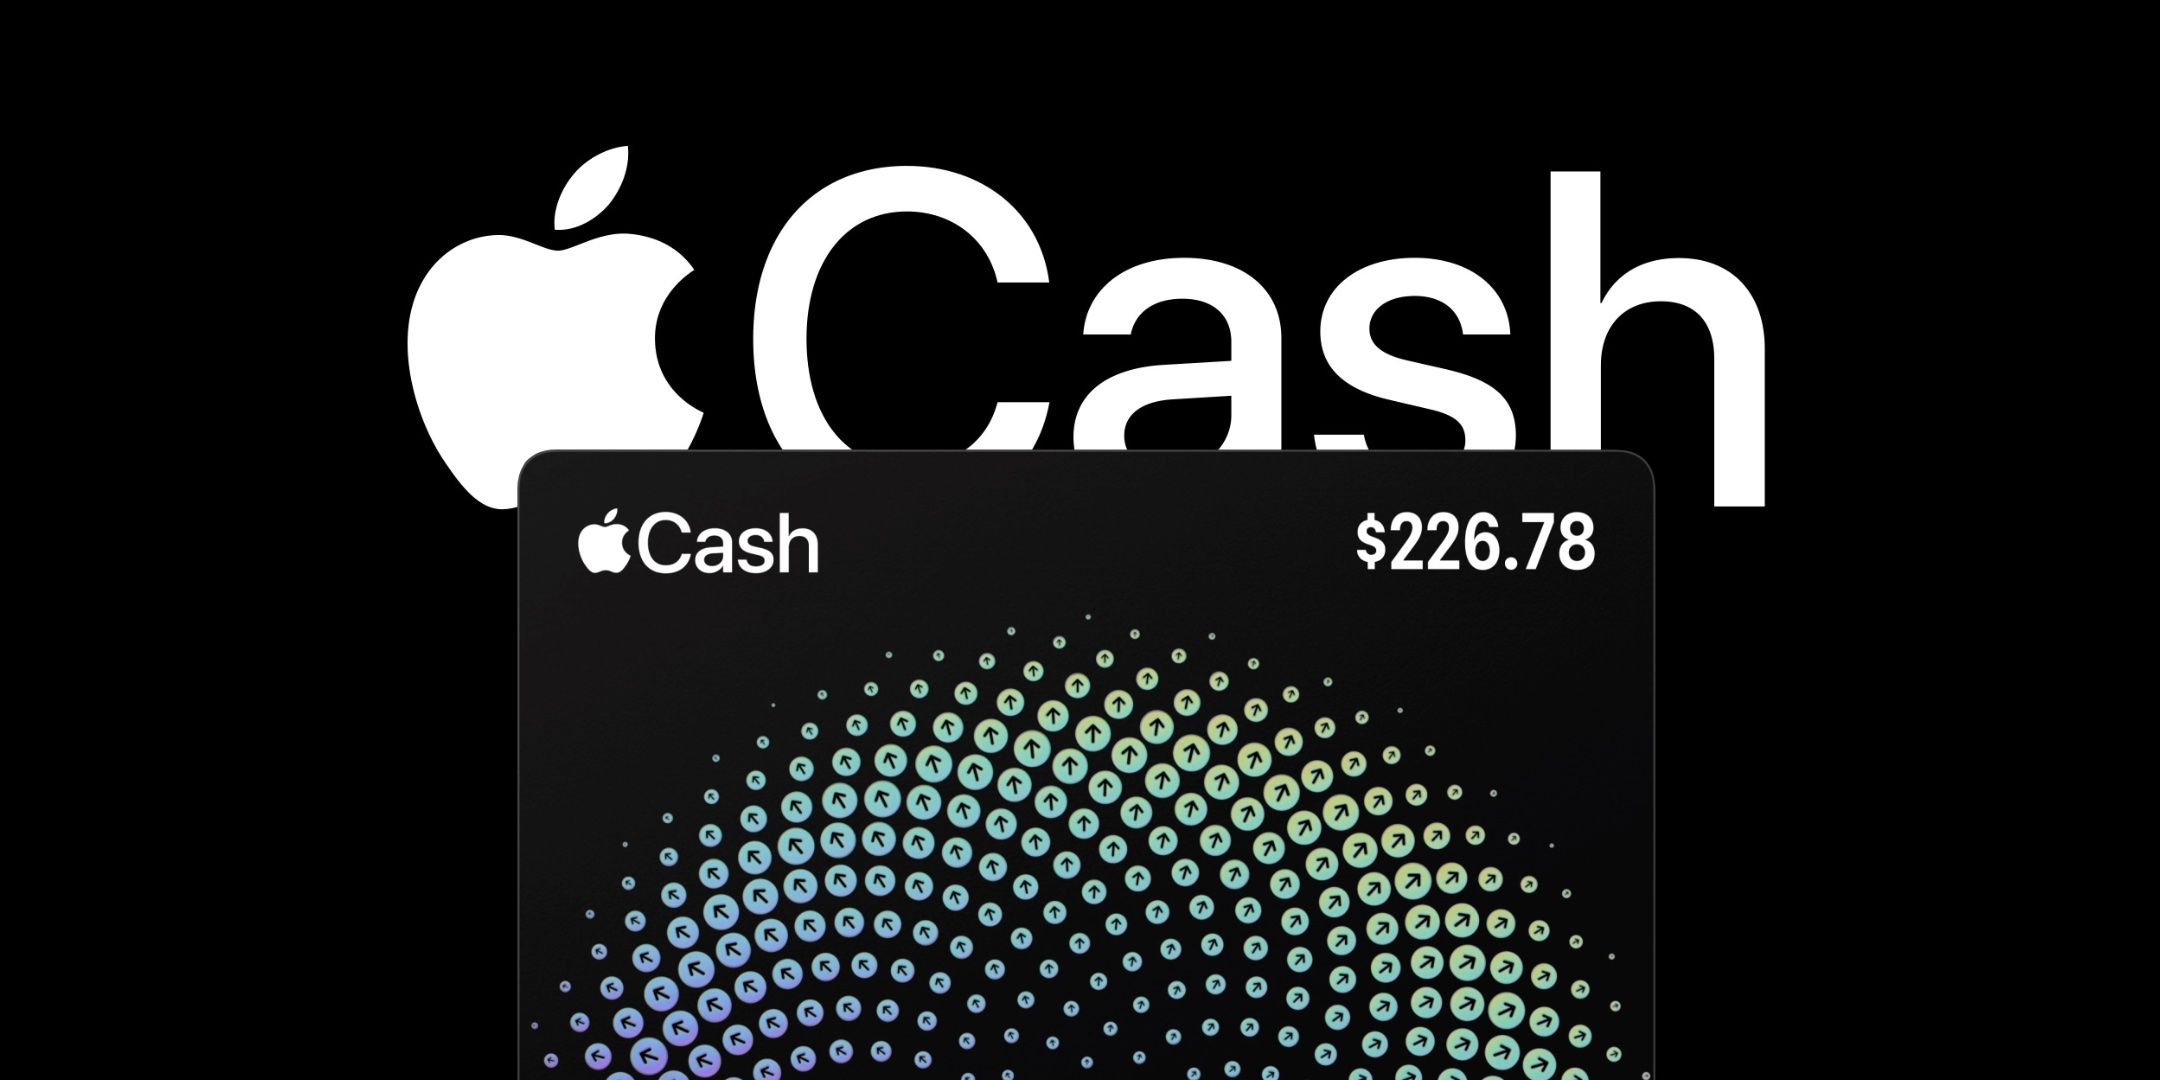 How To Earn Double The Cashback With Apple Card This Summer